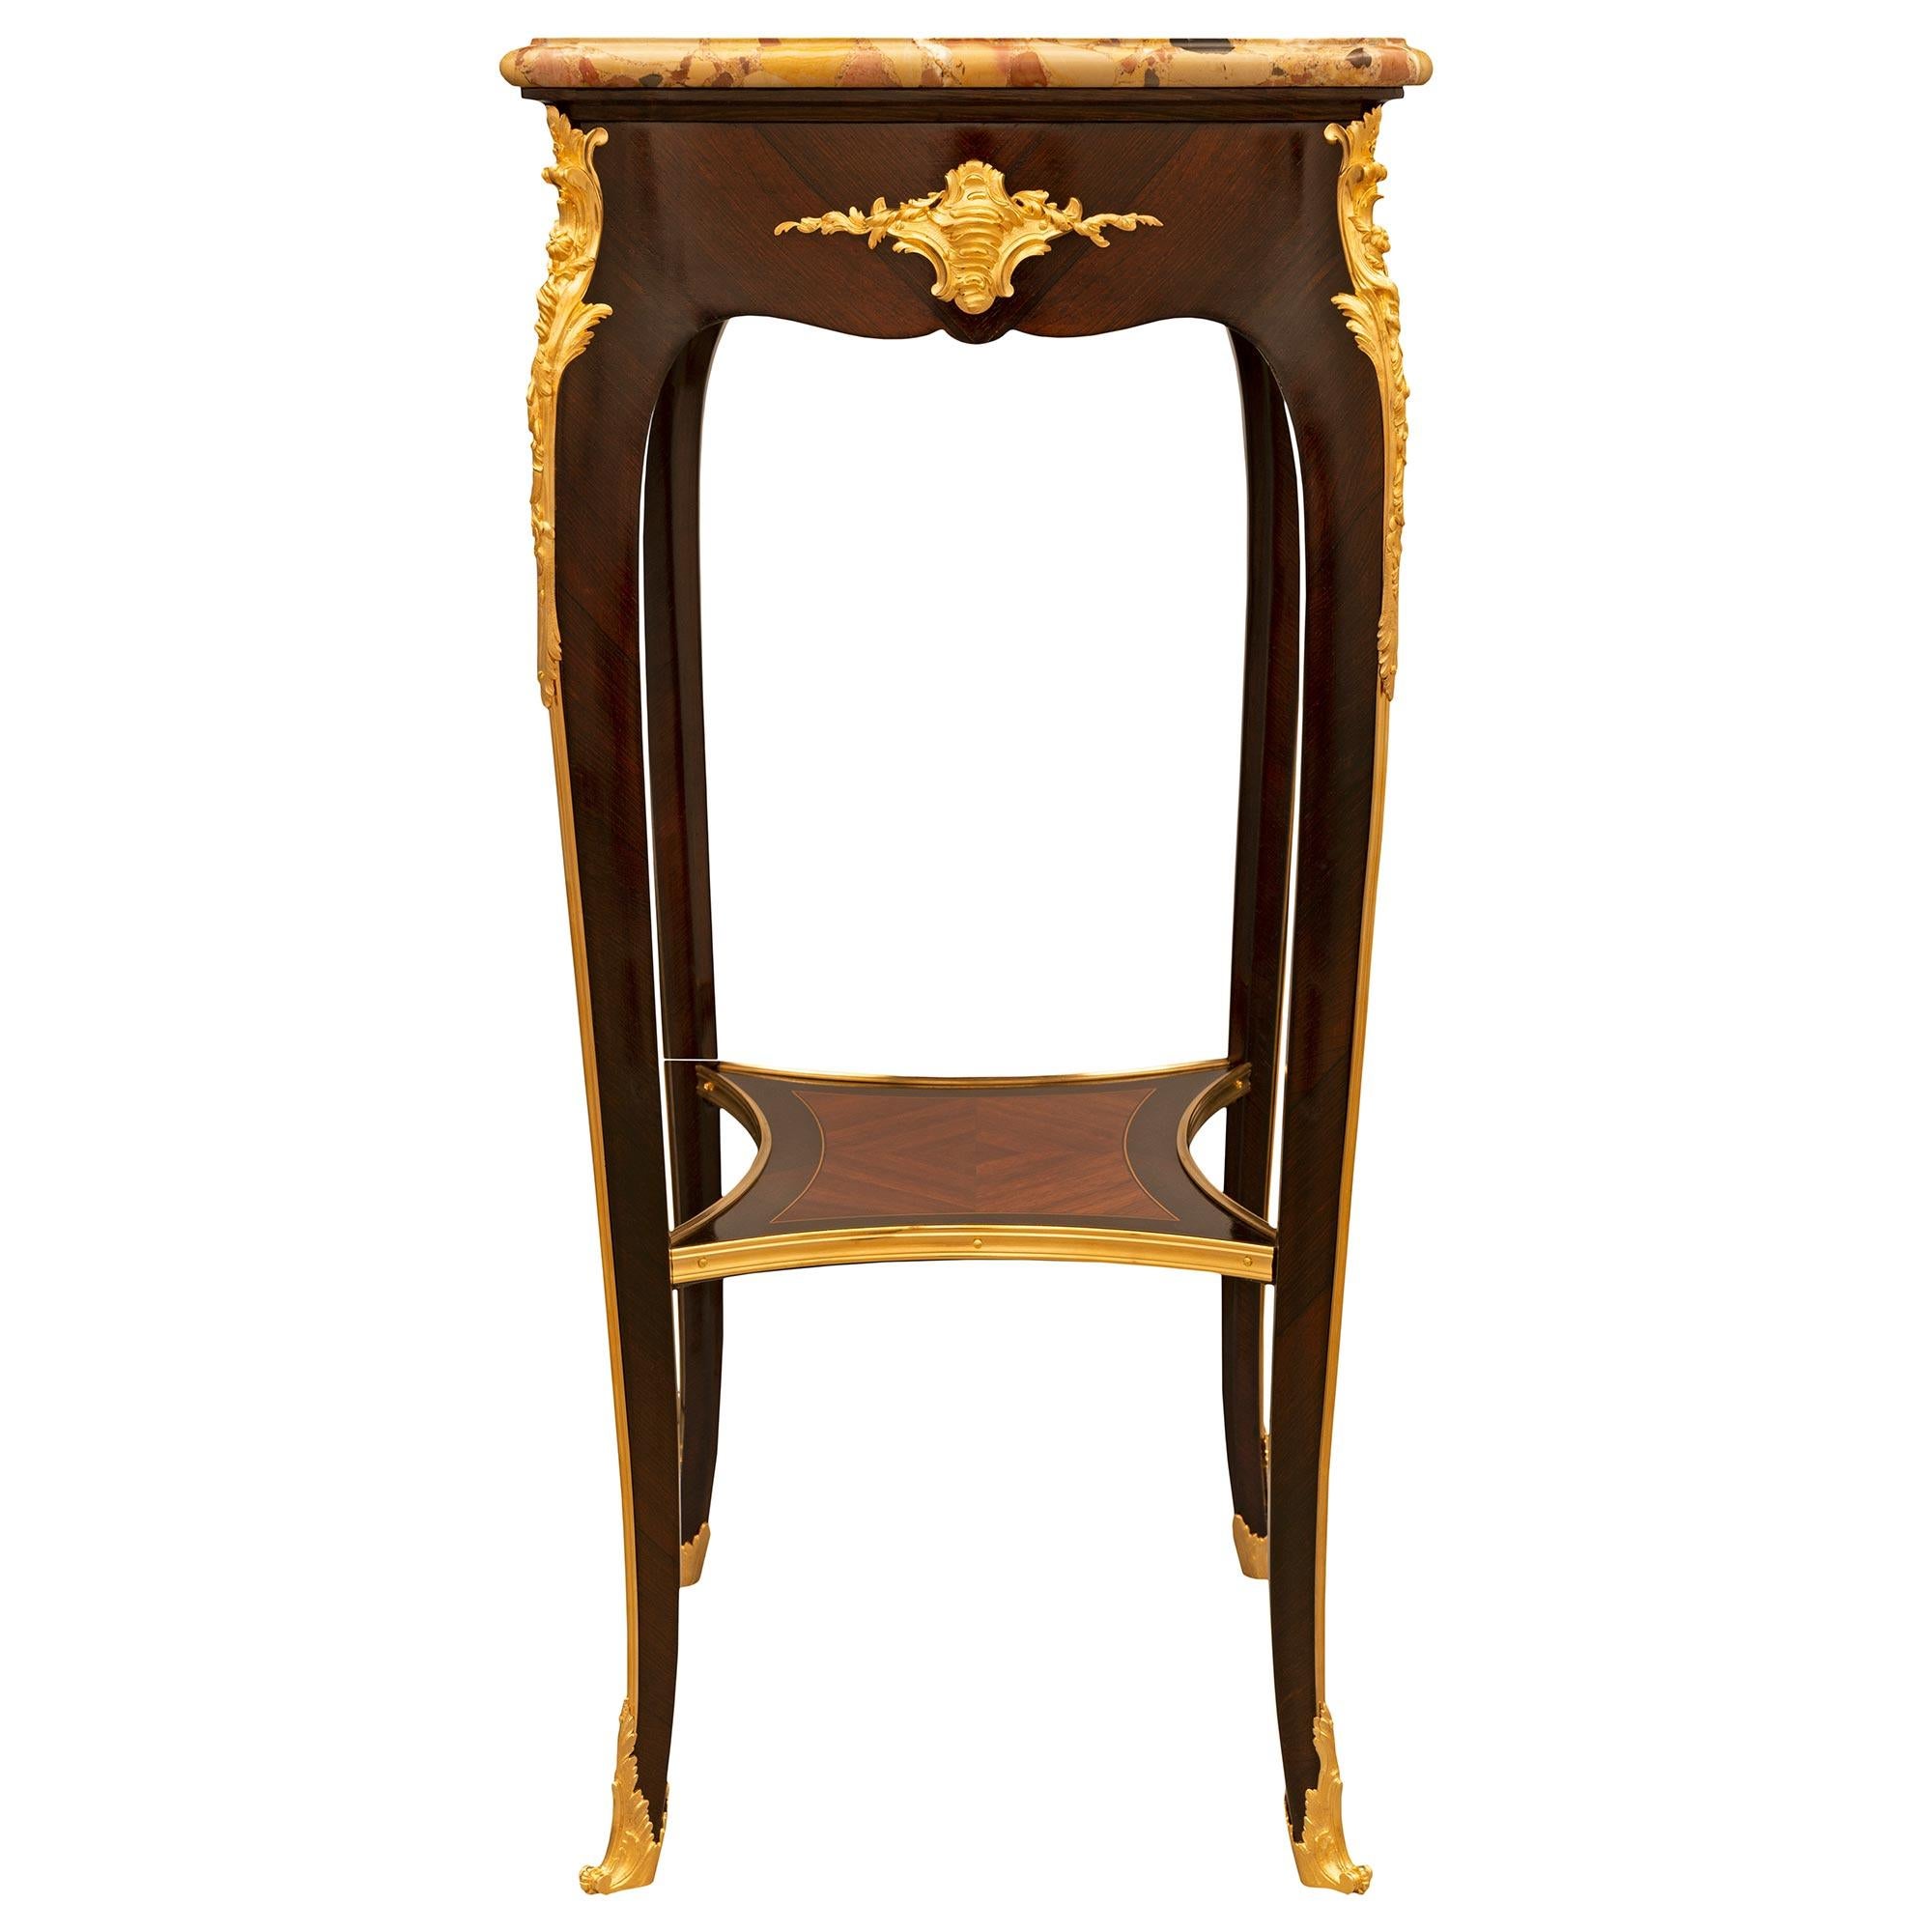 French 19th Century Louis XV St. Kingwood, Ormolu and Brèche D'alep Side Table For Sale 2